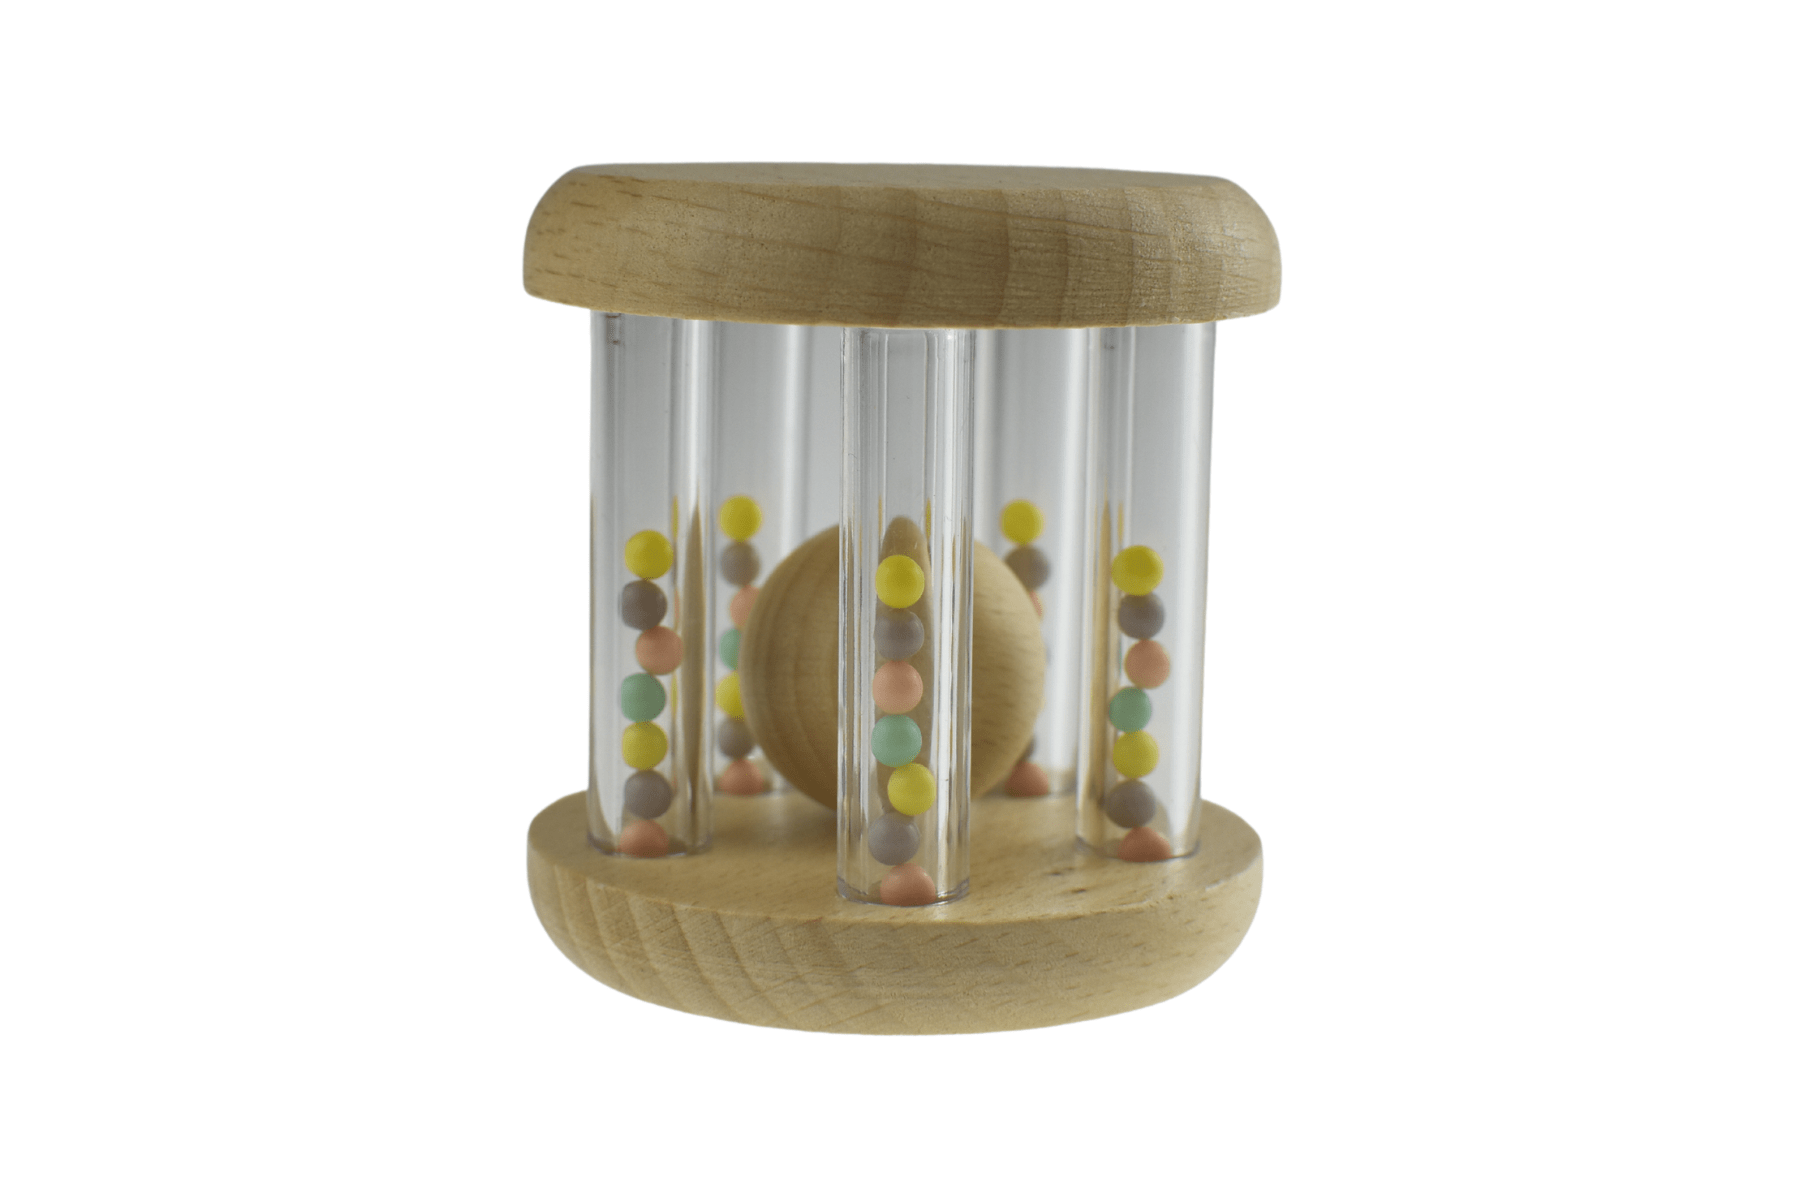 Calm and Breezy Wooden Rattle With Rainbow Bead